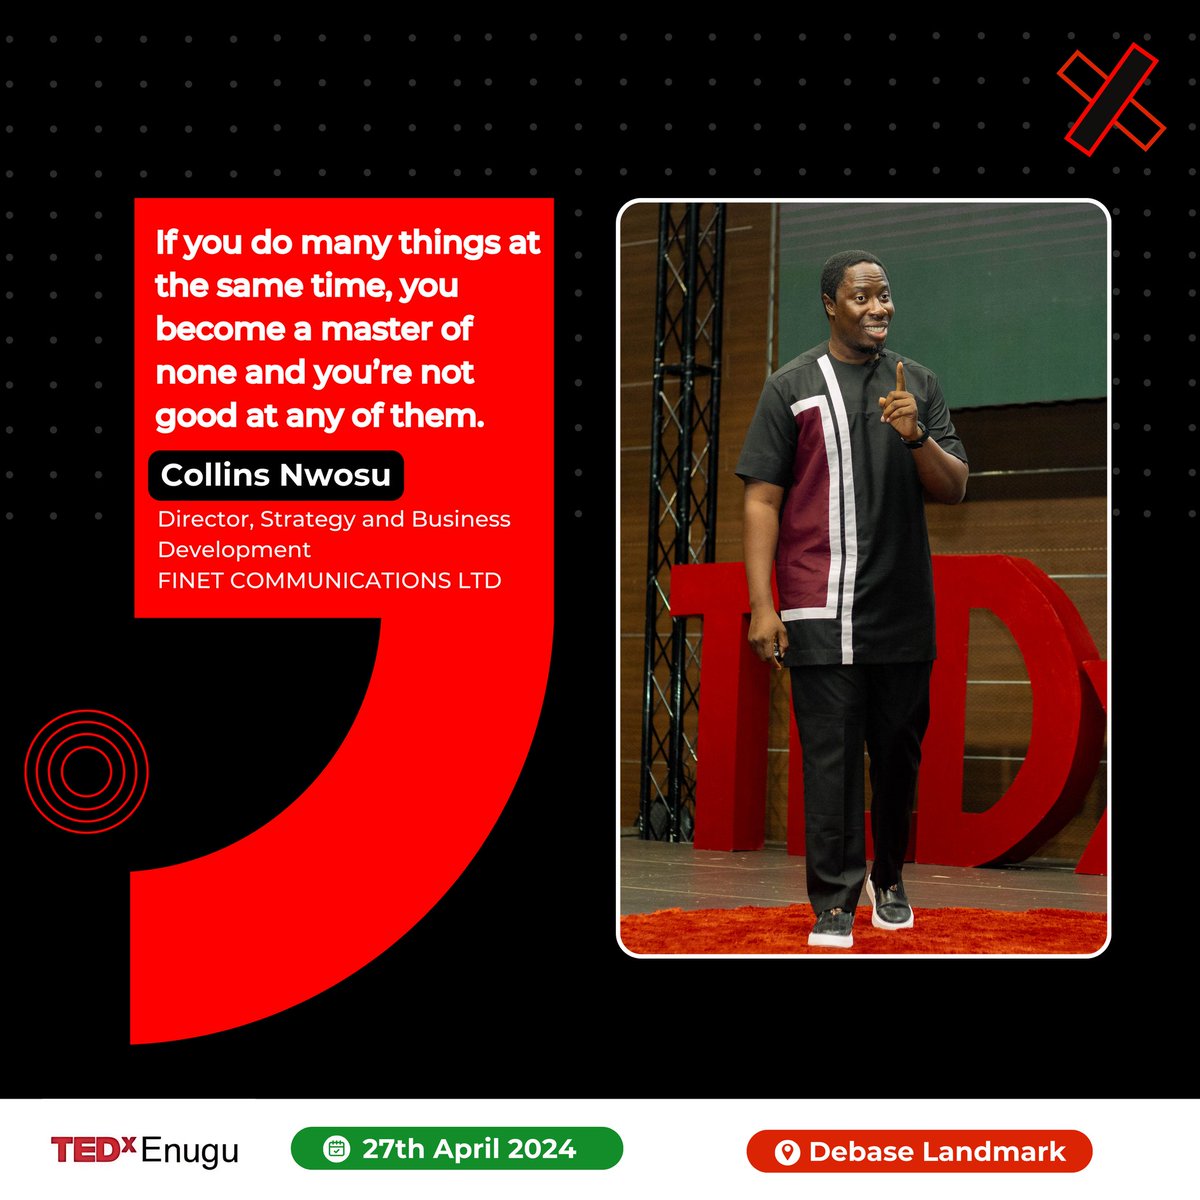 If you do so may things at the same time, you become a master of none and you are not good at any of them.
- Collins Nwosu.
Director, Strategy and Business Development, Finet Communication LTD.

#Tedx #TedxEnugu